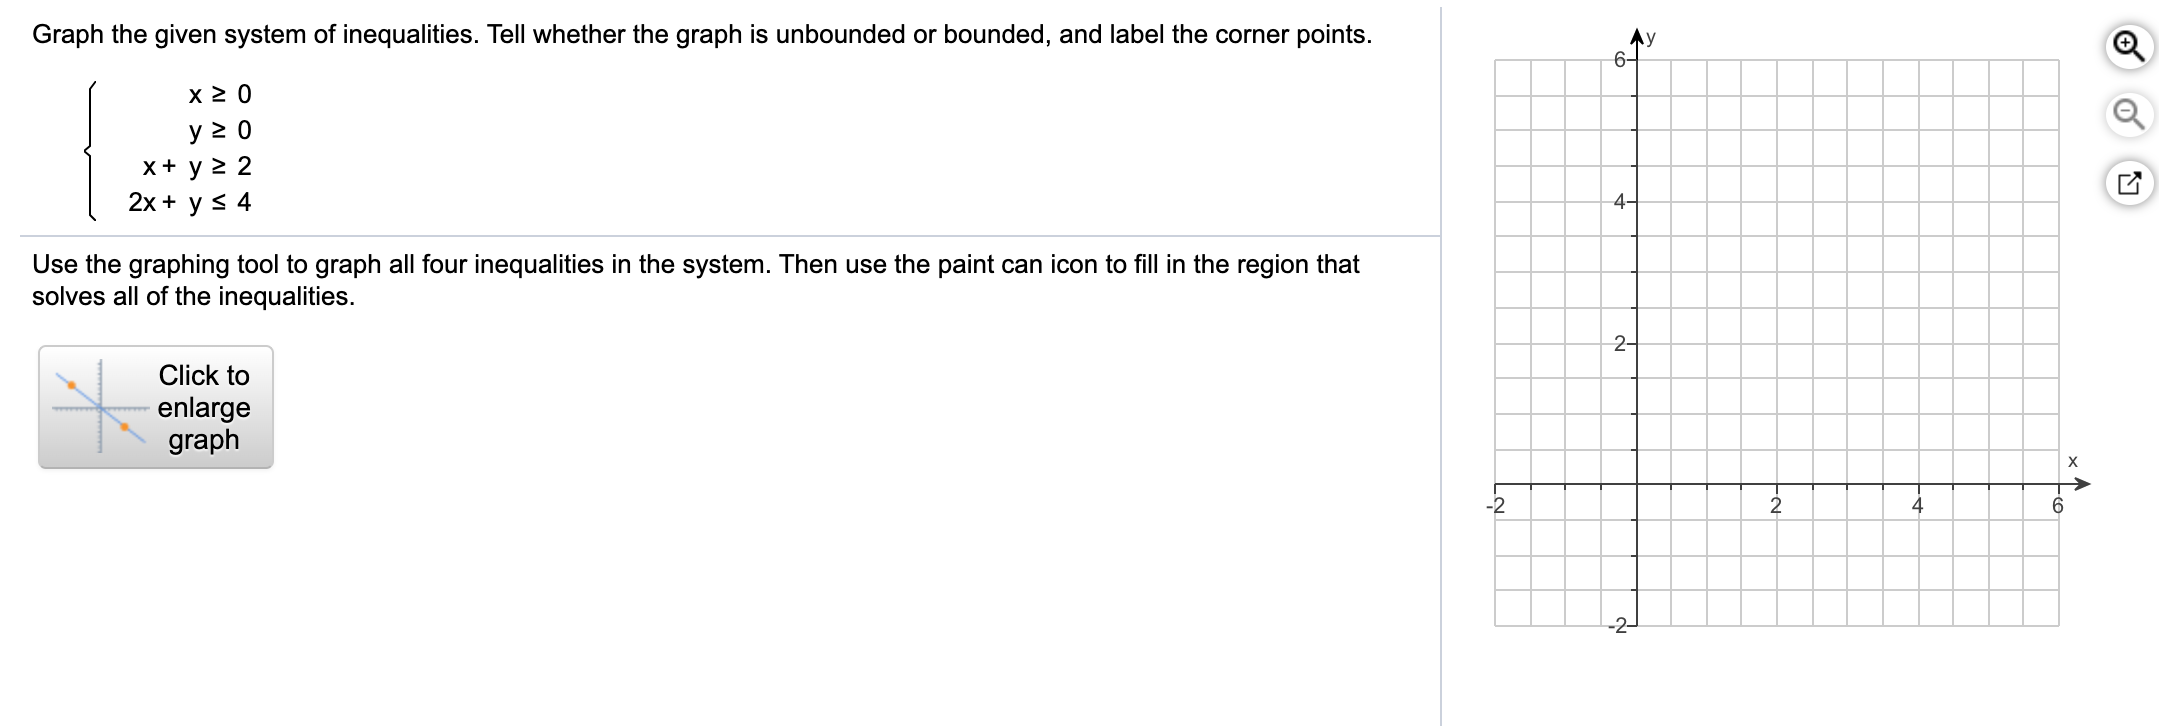 Graph the given system of inequalities. Tell whether the graph is unbounded or bounded, and label the corner points.
Ay
6-
y 2 0
x+ y > 2
2х + y S 4
4-
Use the graphing tool to graph all four inequalities in the system. Then use the paint can icon to fill in the region that
solves all of the inequalities.
2-
Click to
enlarge
graph
х
-2
4
-2-
